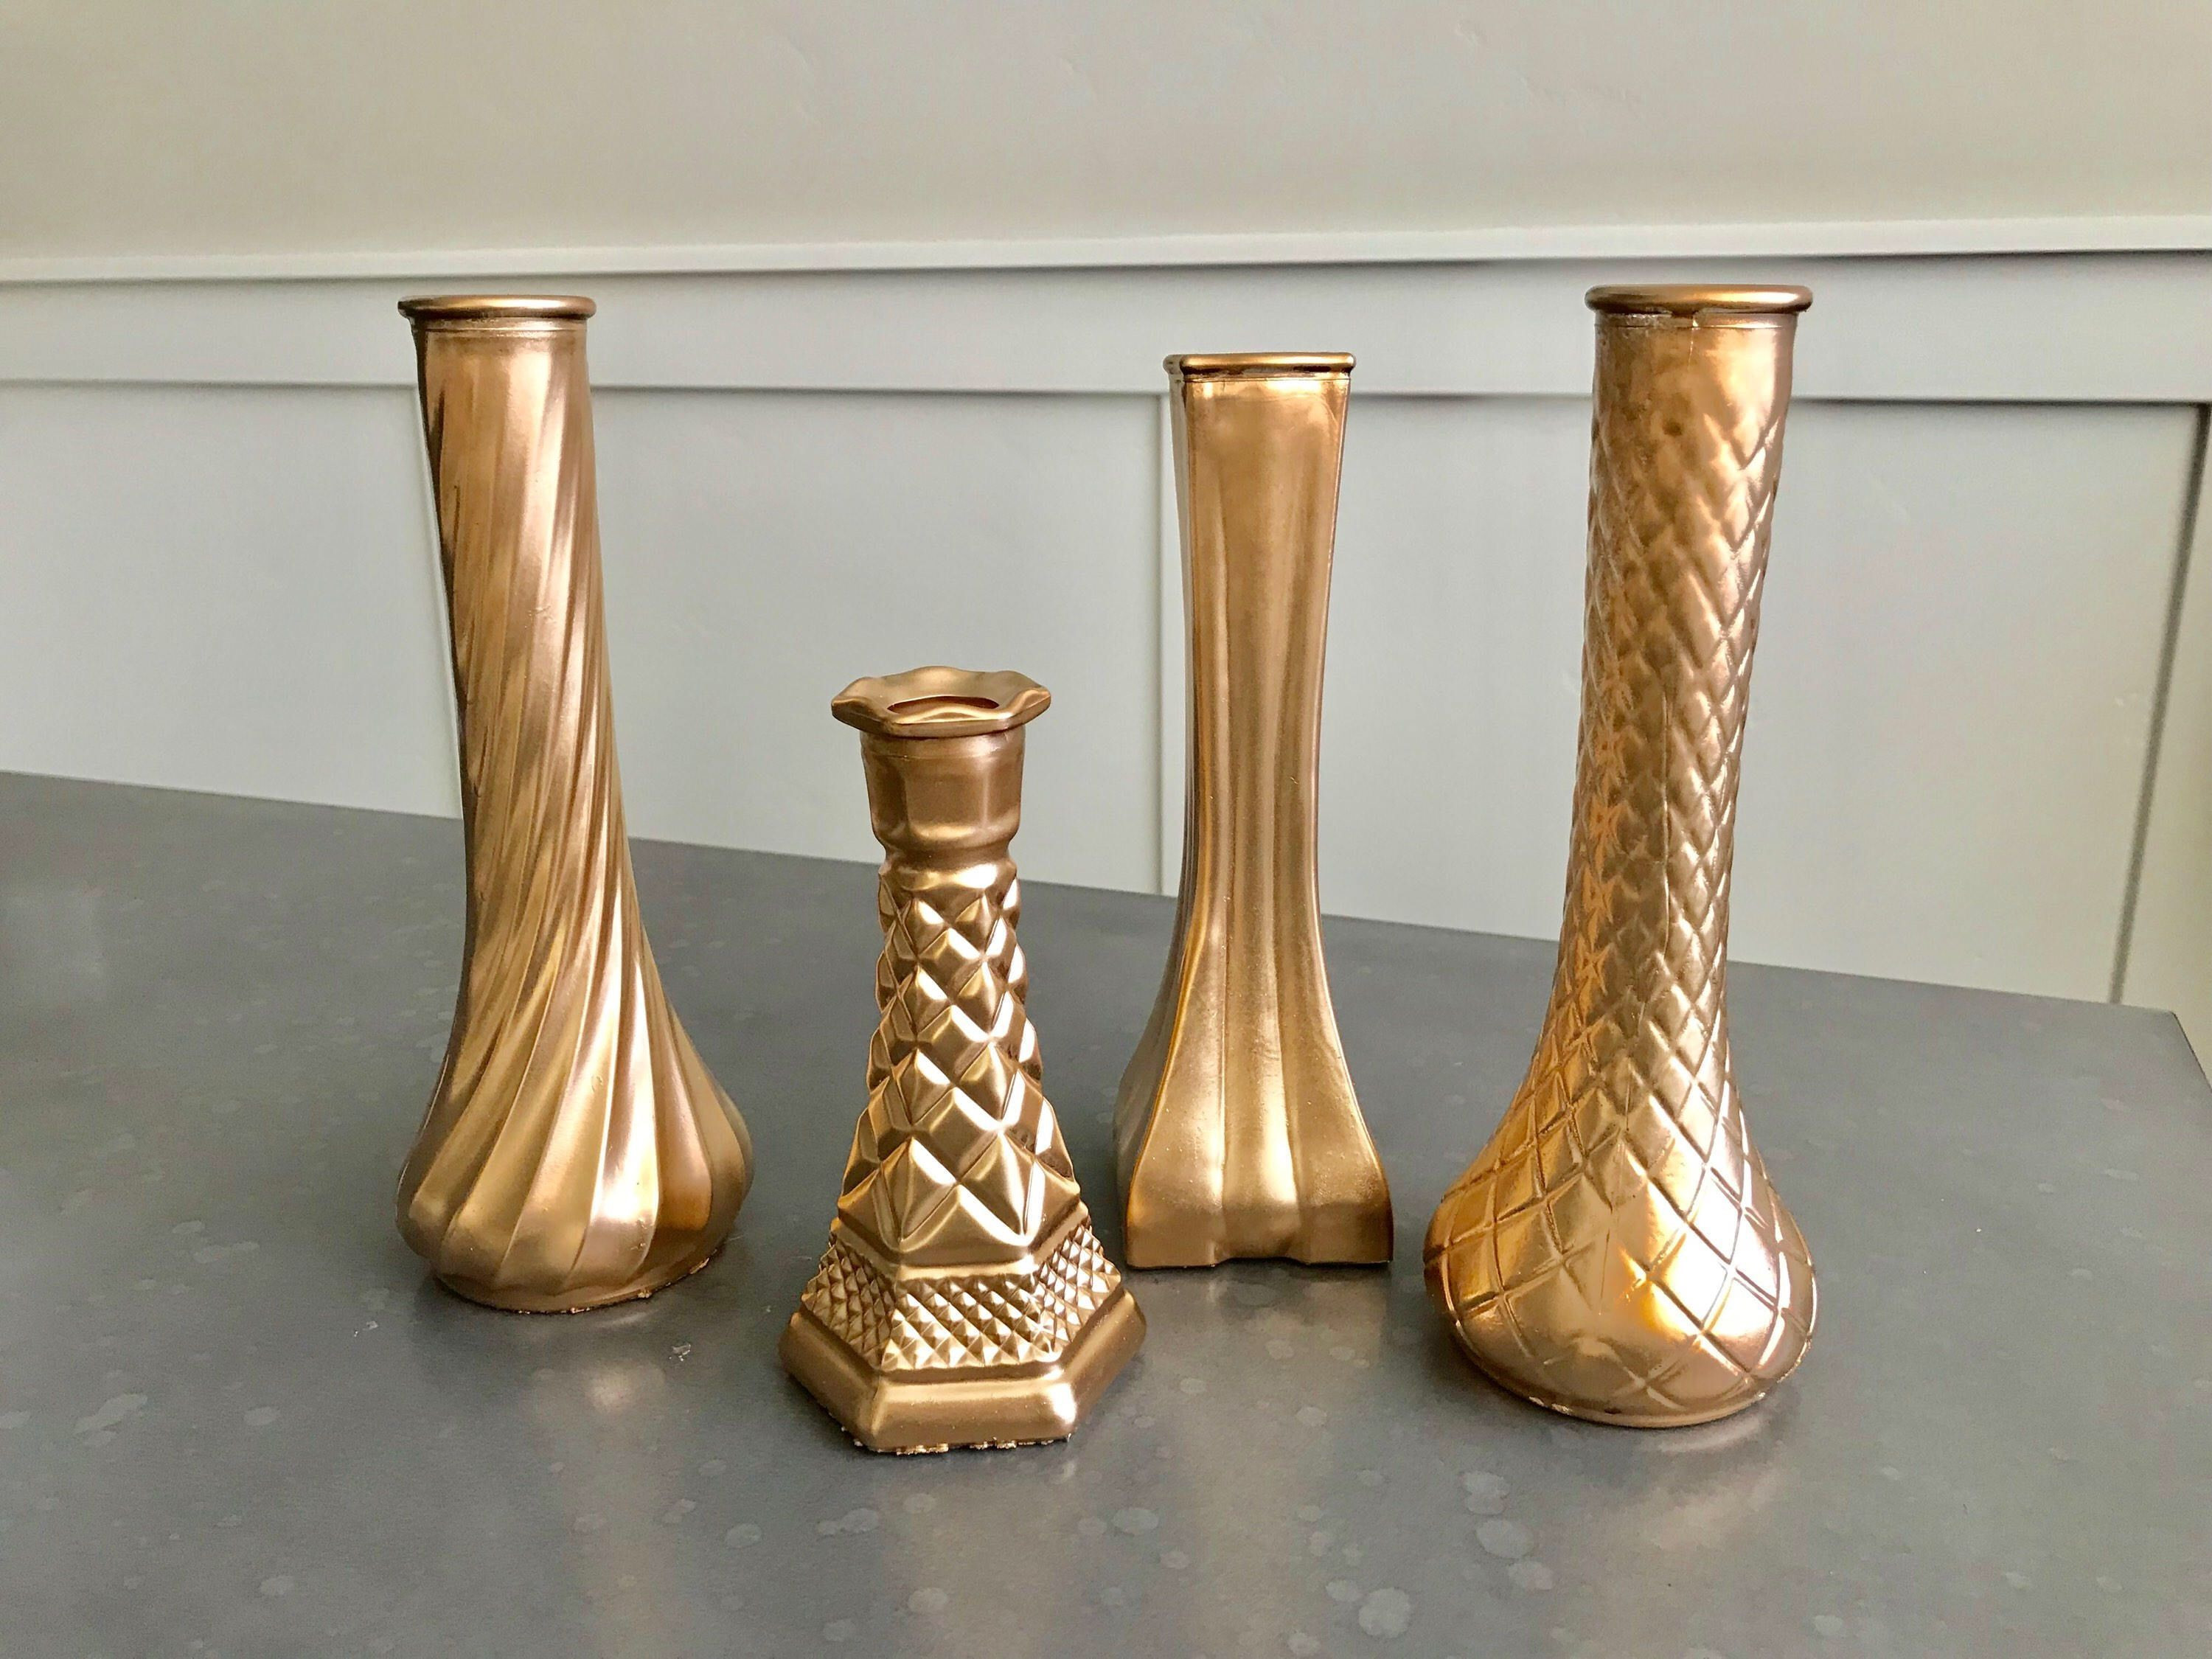 20 Lovable Antique Gold Flower Vase 2024 free download antique gold flower vase of 34 gold mercury glass vases the weekly world in gold boho 4pc glass vases boho table decor holiday table decor